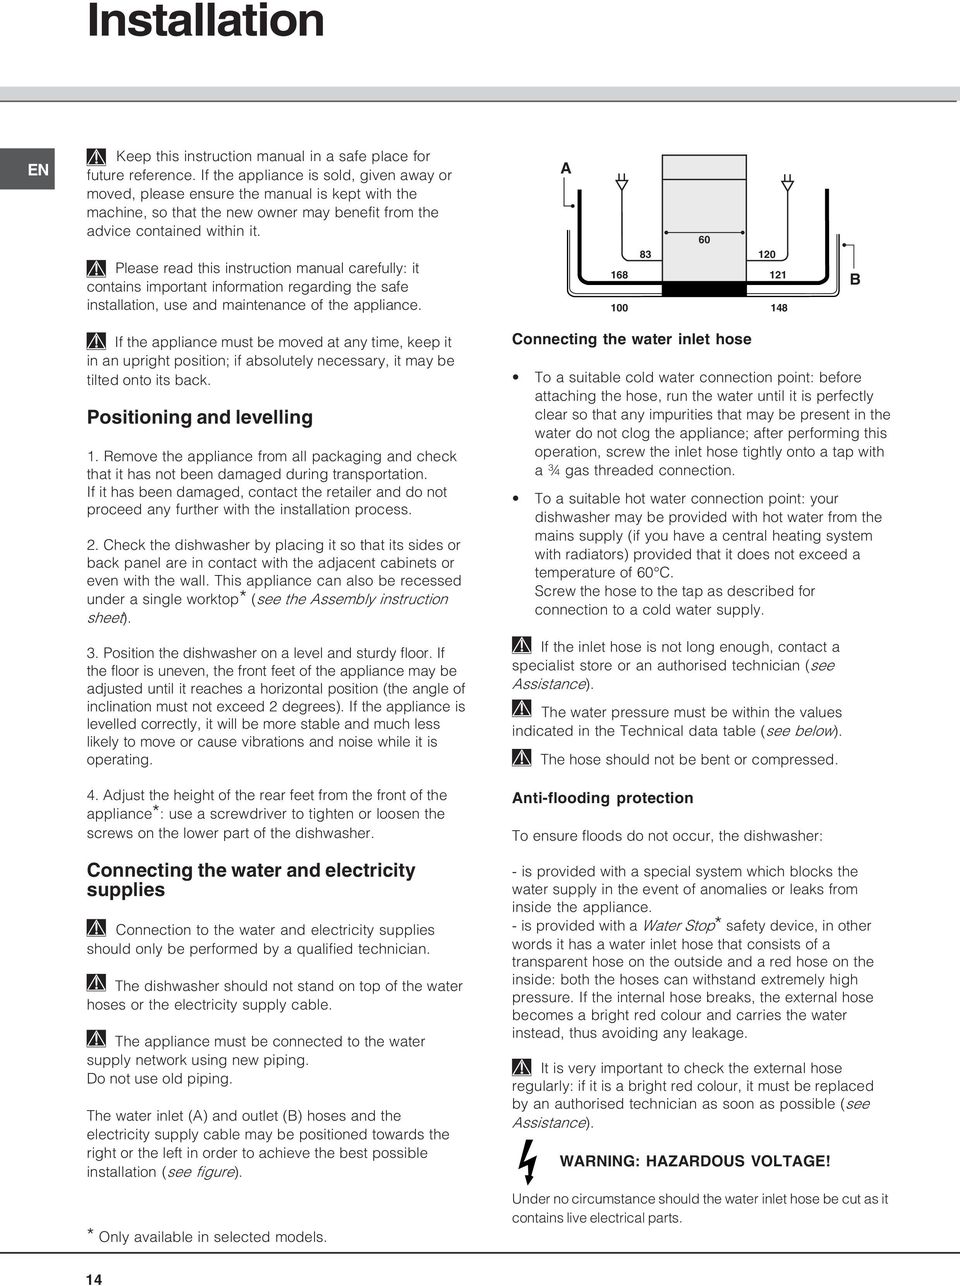 Please read this instruction manual carefully: it contains important information regarding the safe installation, use and maintenance of the appliance.